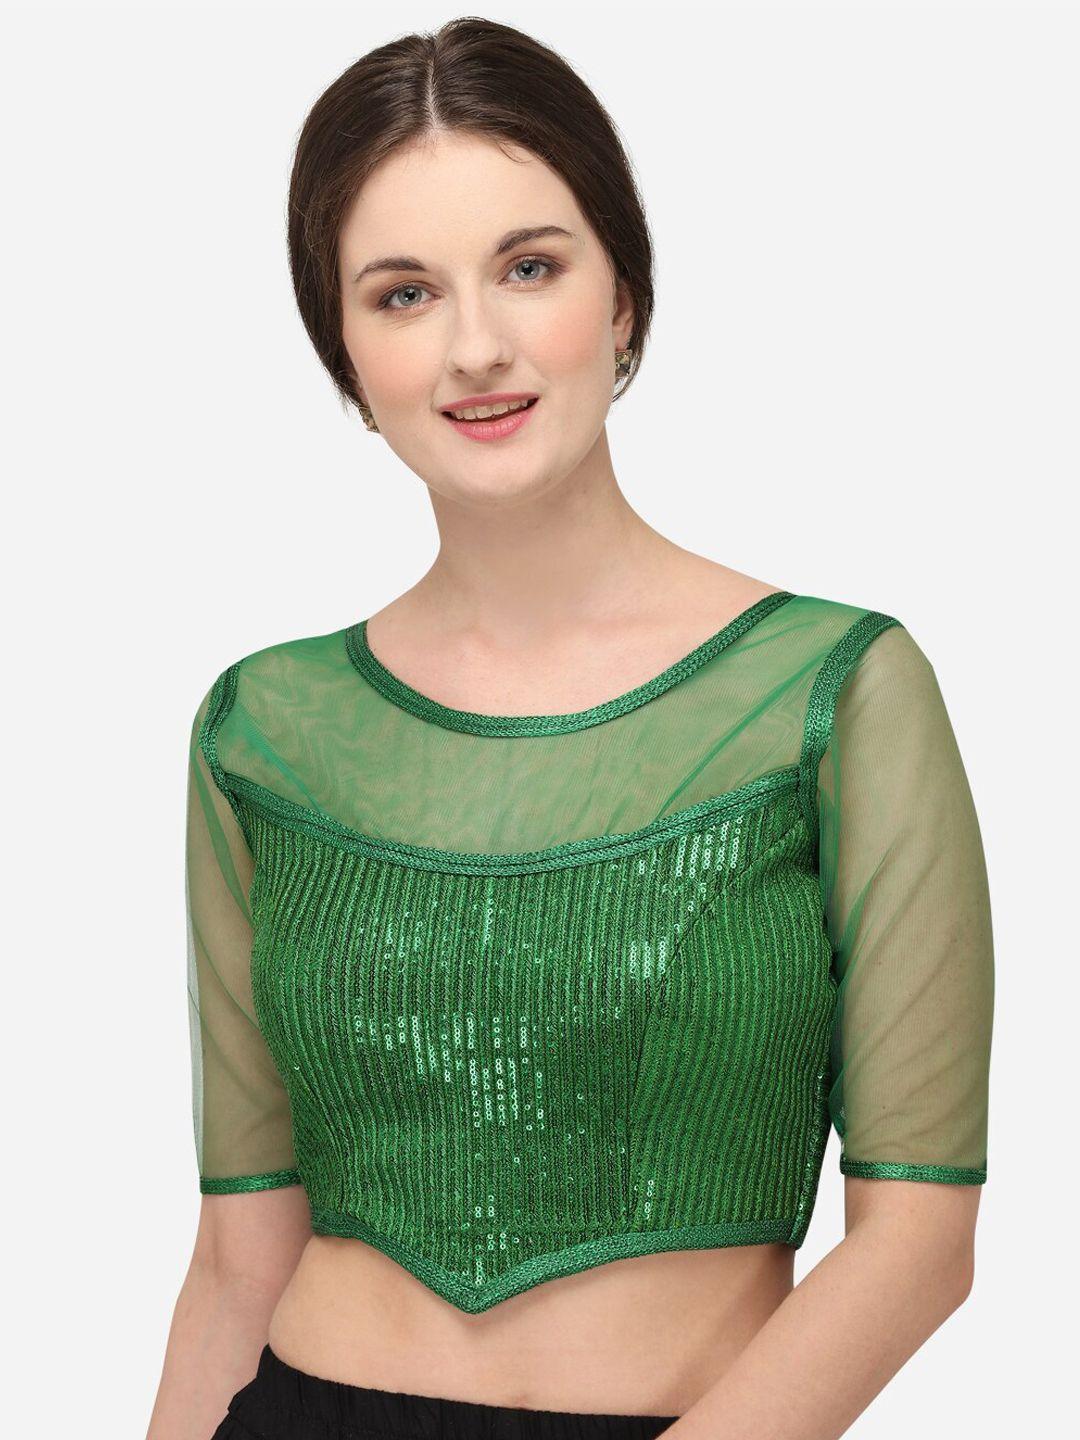 mitera sequence embroidered saree blouse